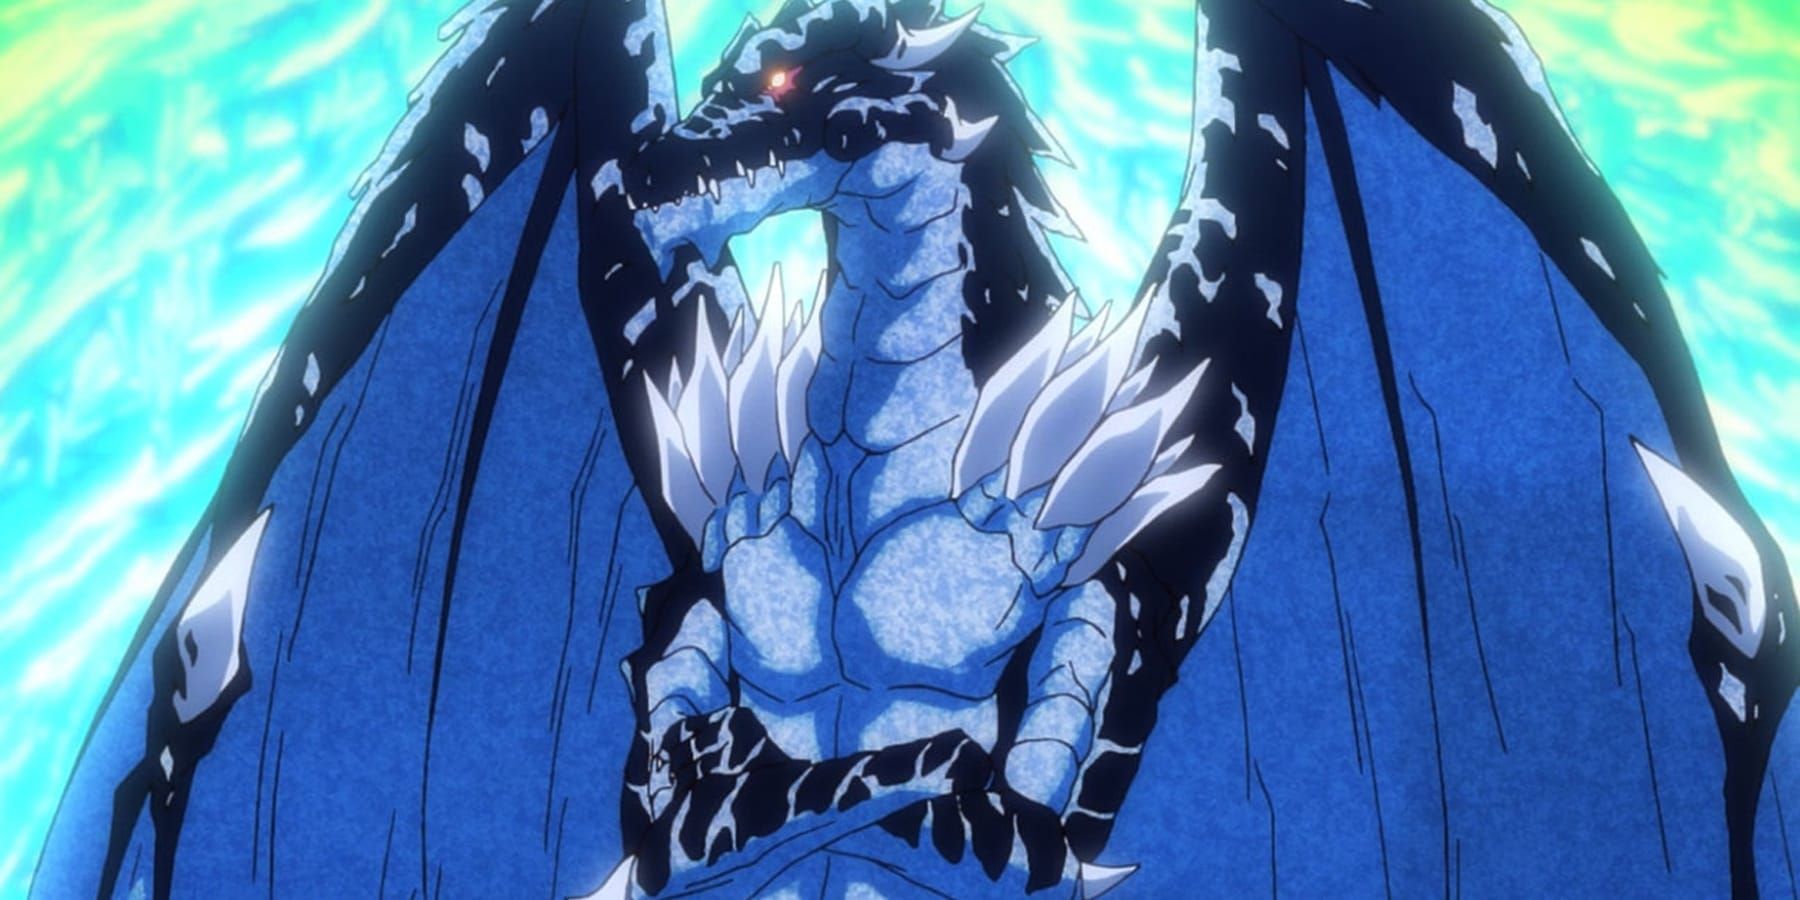 That Time I Got Reincarnated as a Slime Storm Dragon